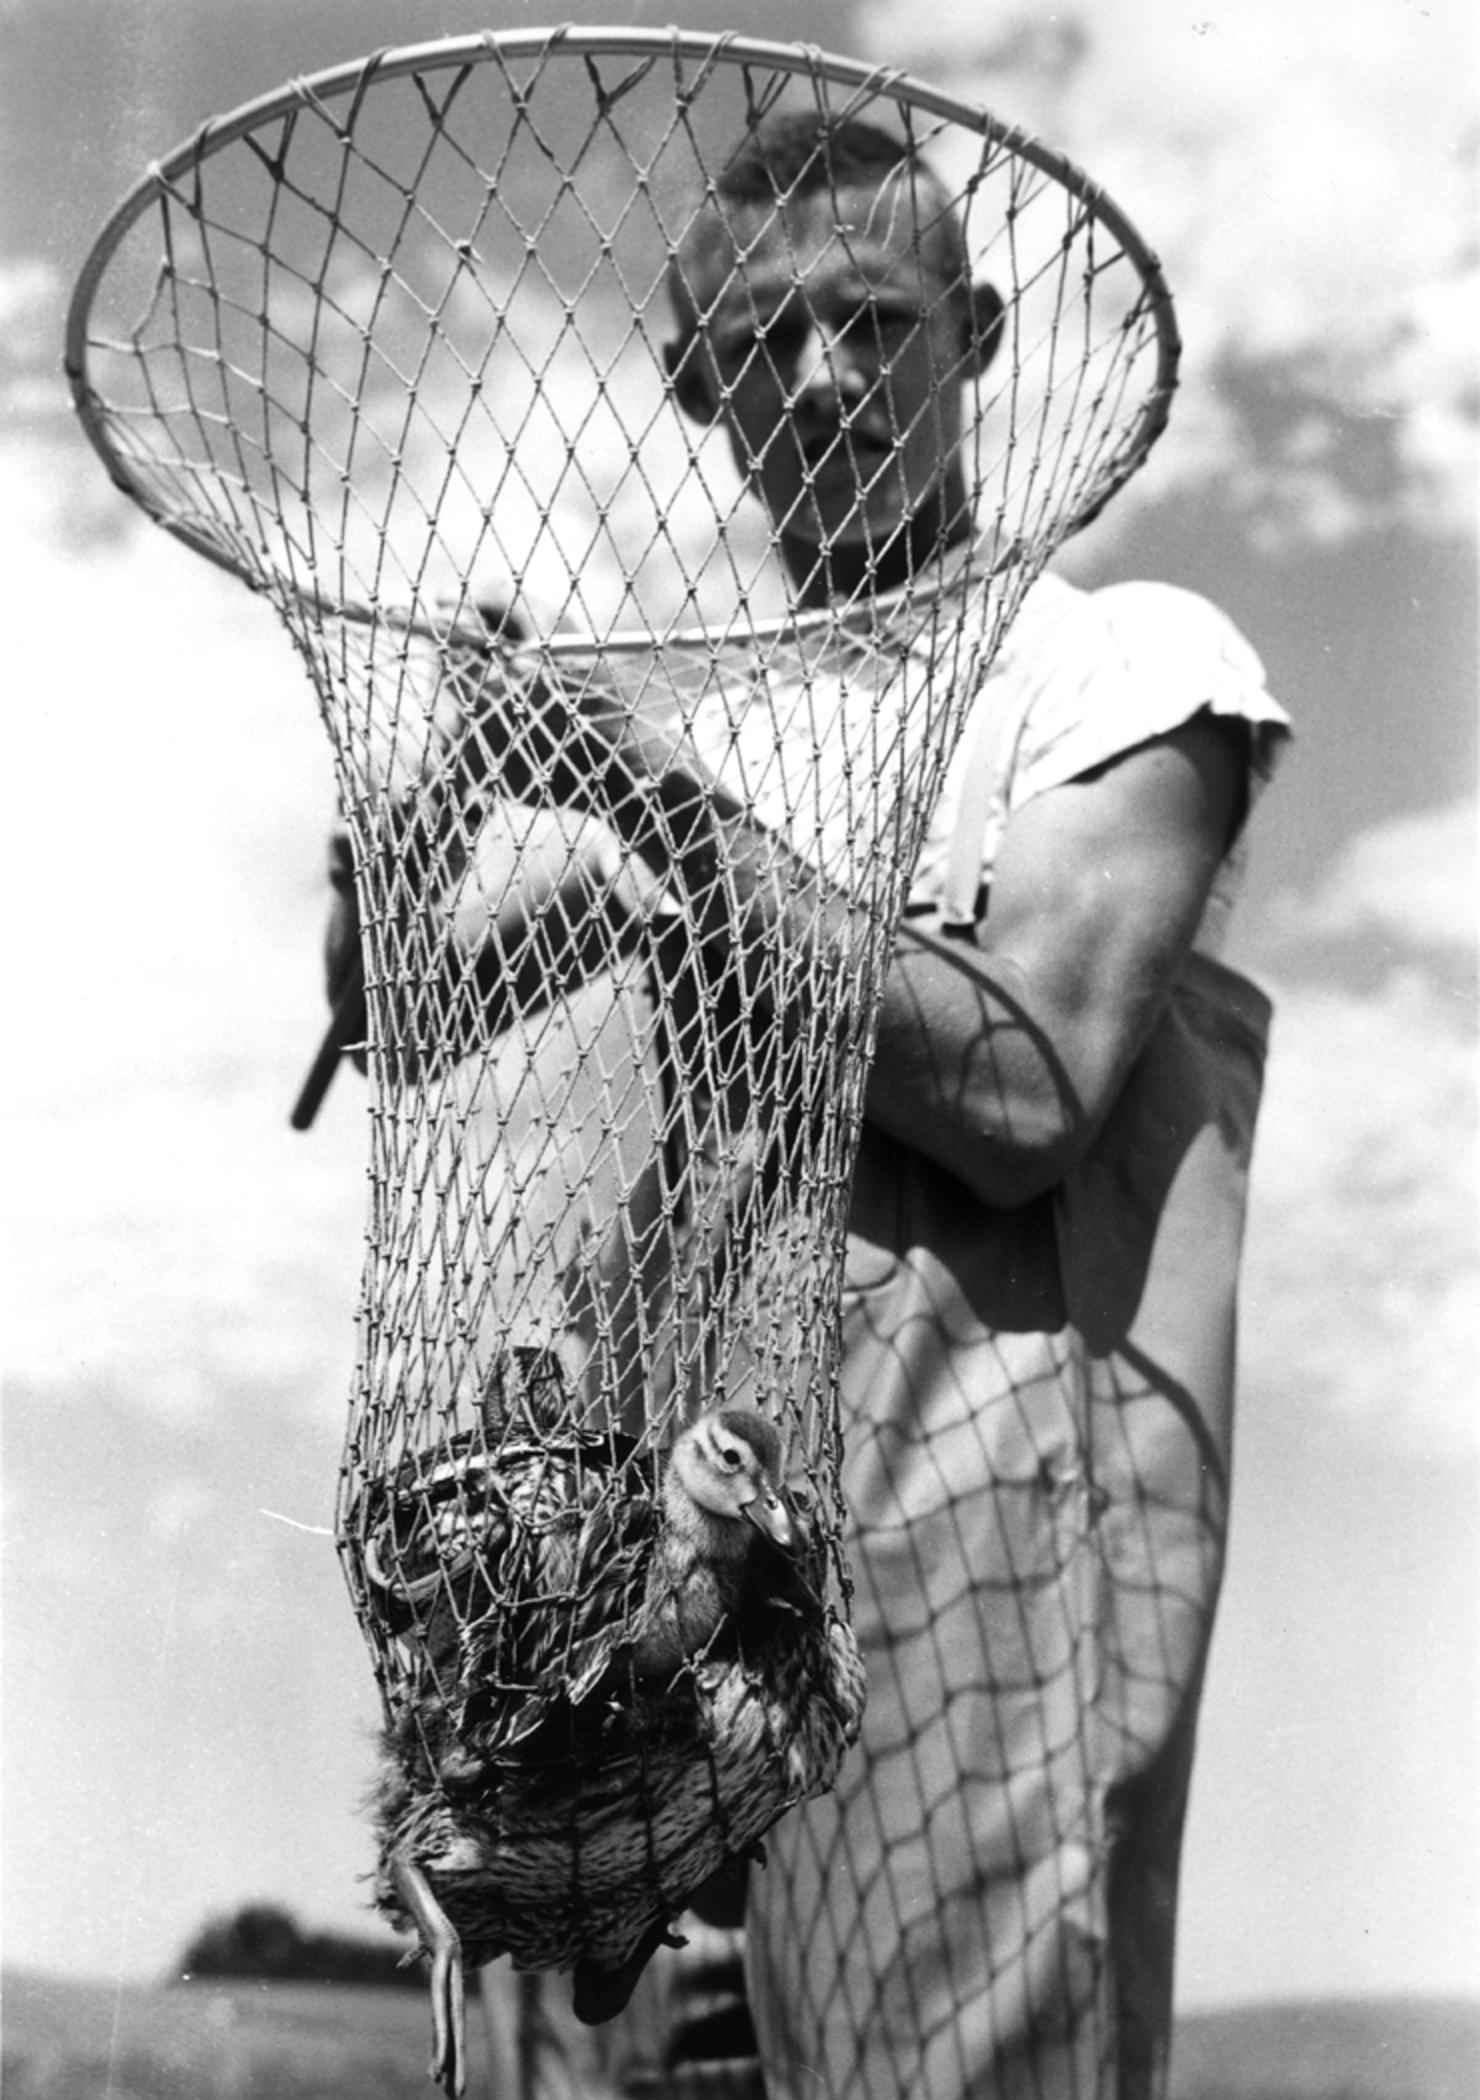 File:Boy holds duck in net historical image vintage.jpg - Wikimedia Commons